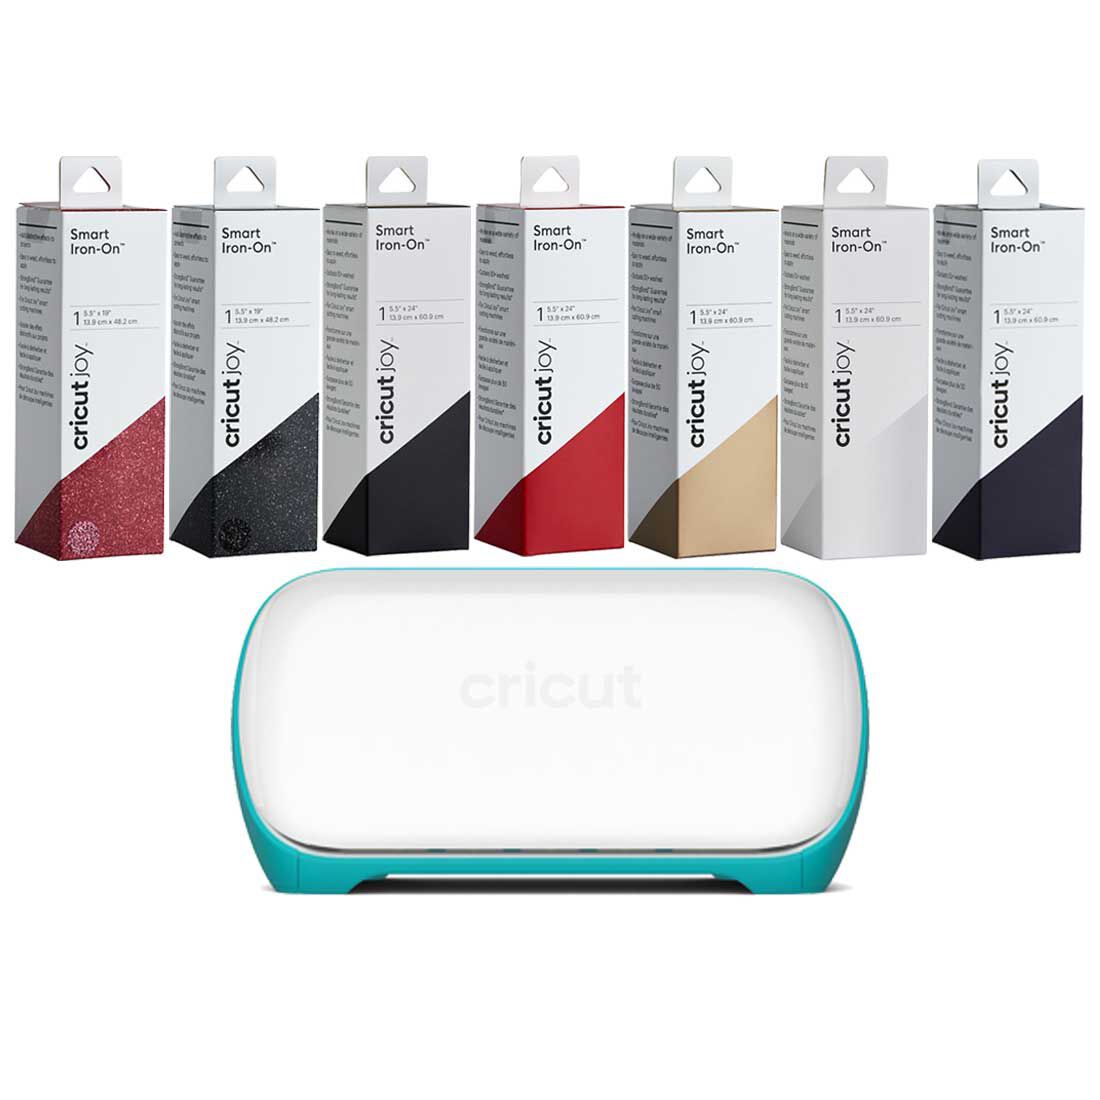 5 Ways to Organize your Home with Cricut Joy - We Got The Funk